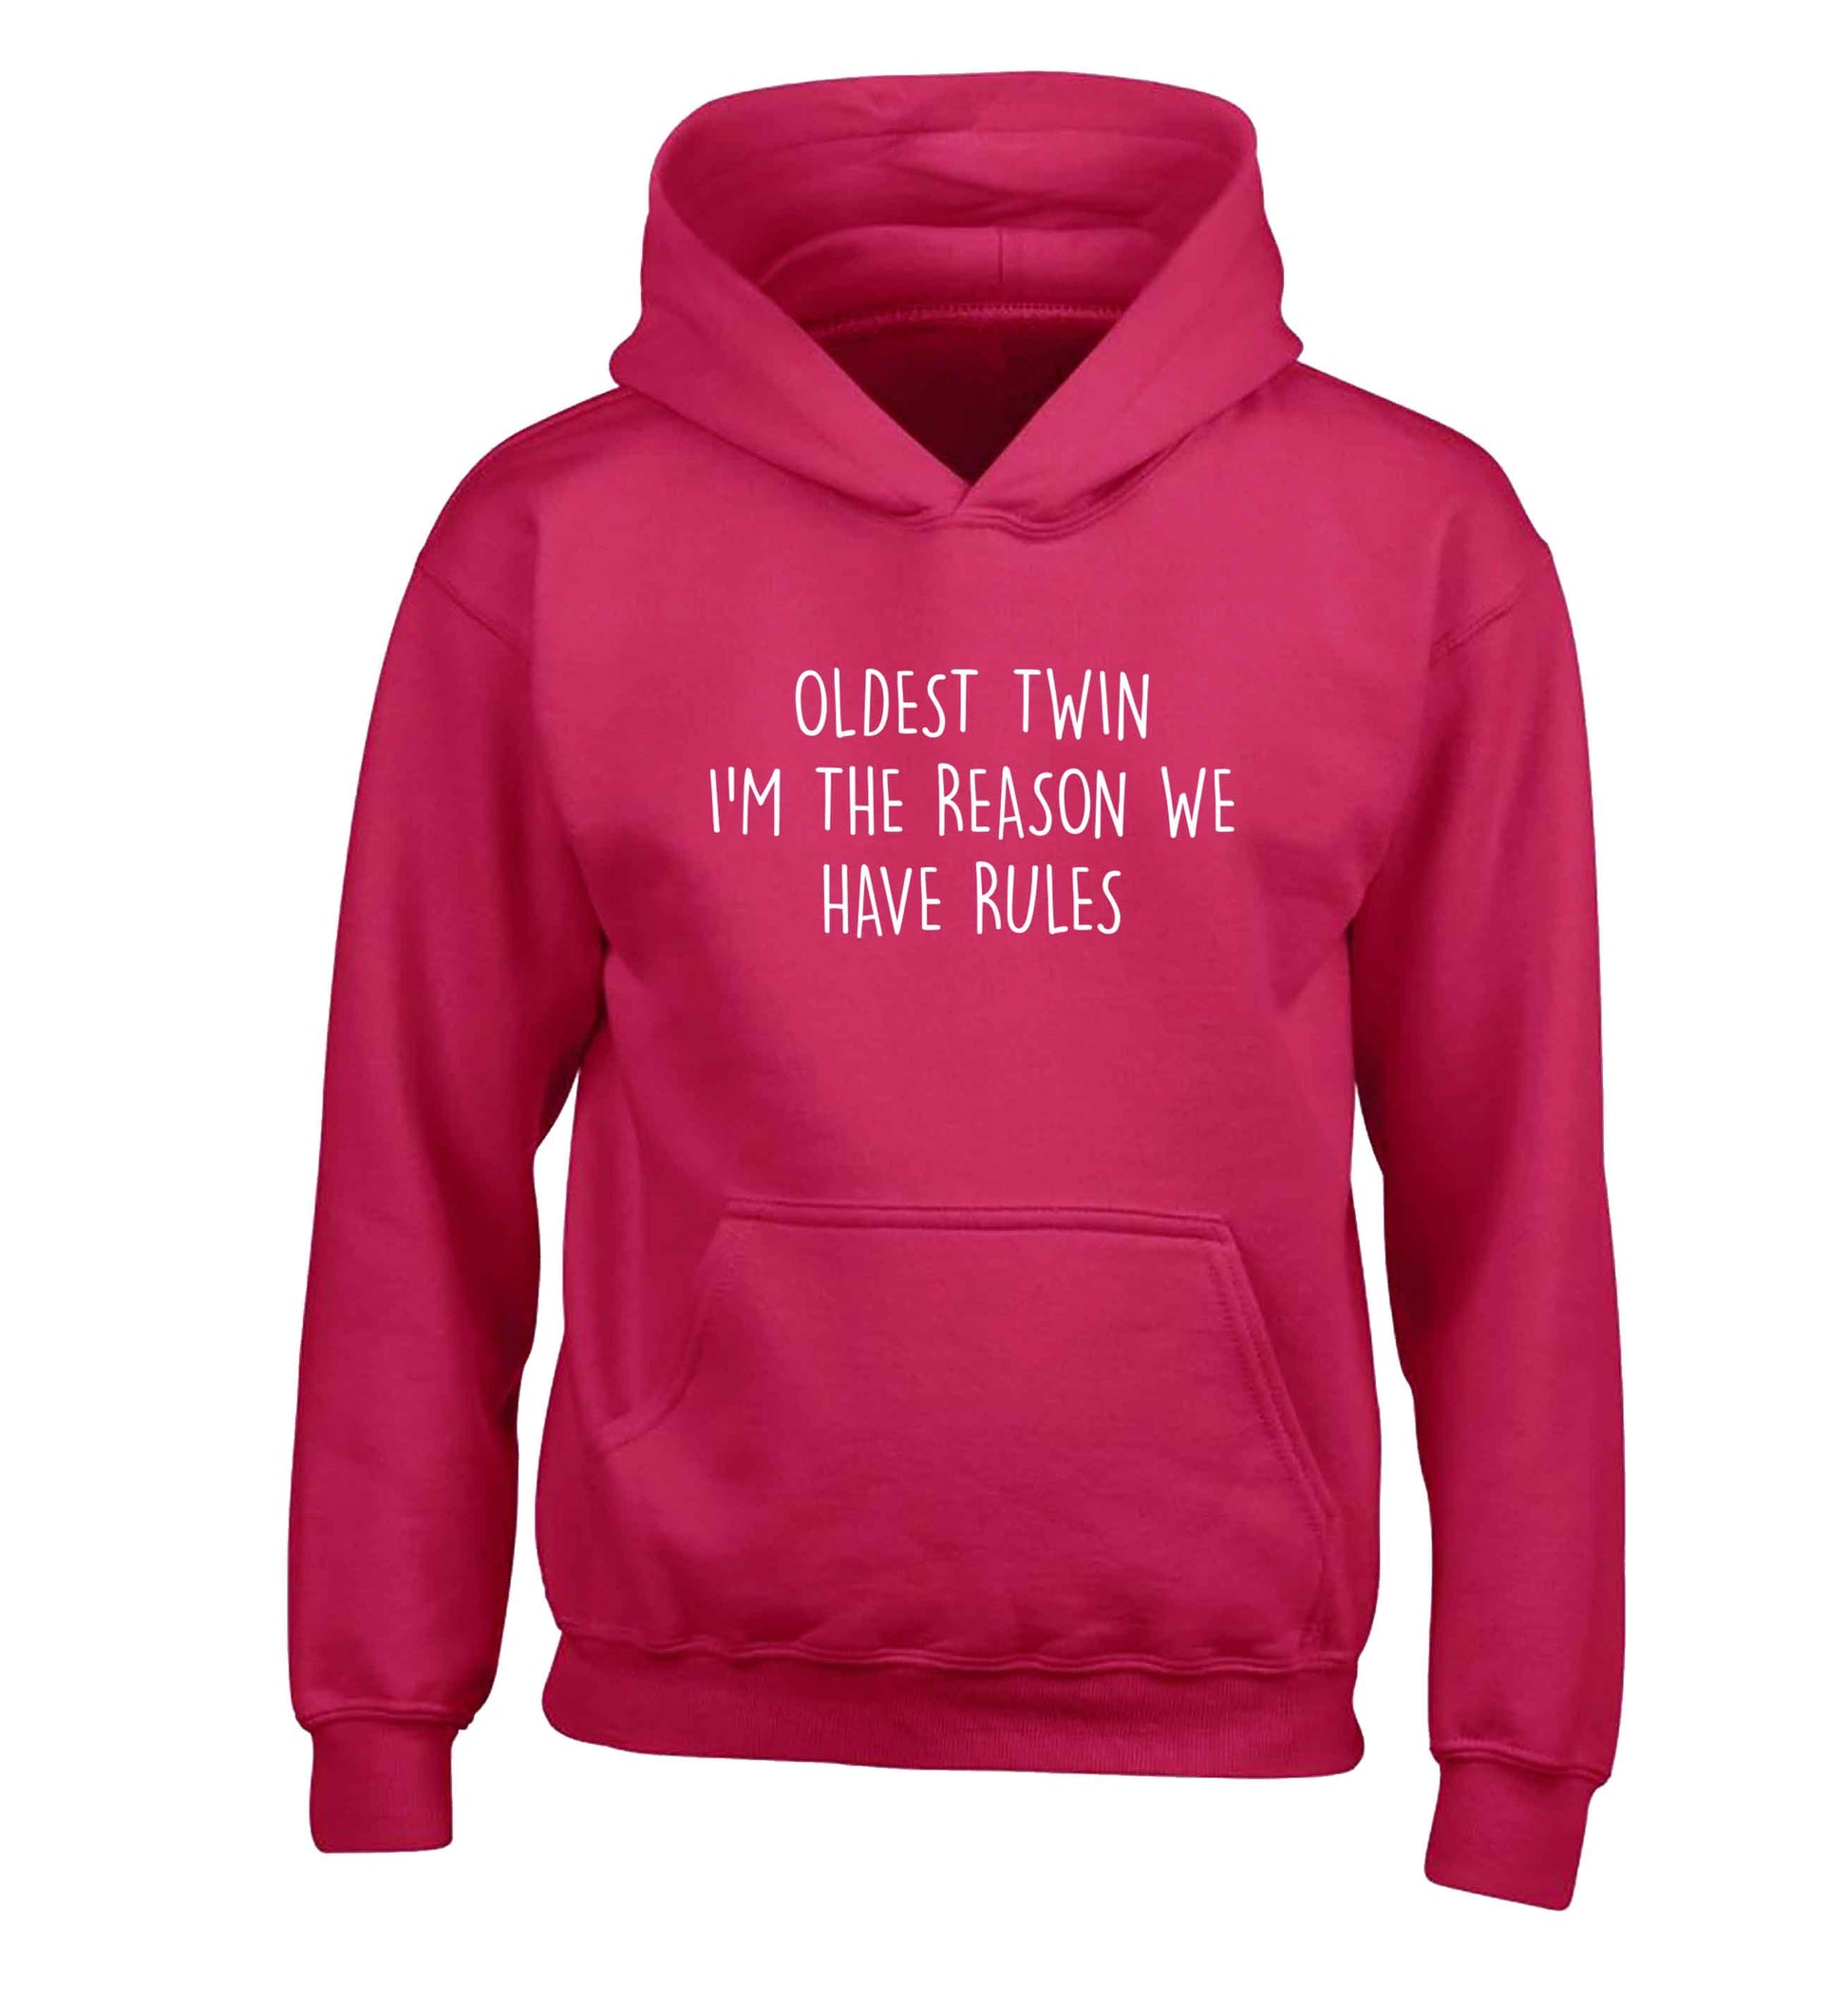 Oldest twin I'm the reason we have rules children's pink hoodie 12-13 Years